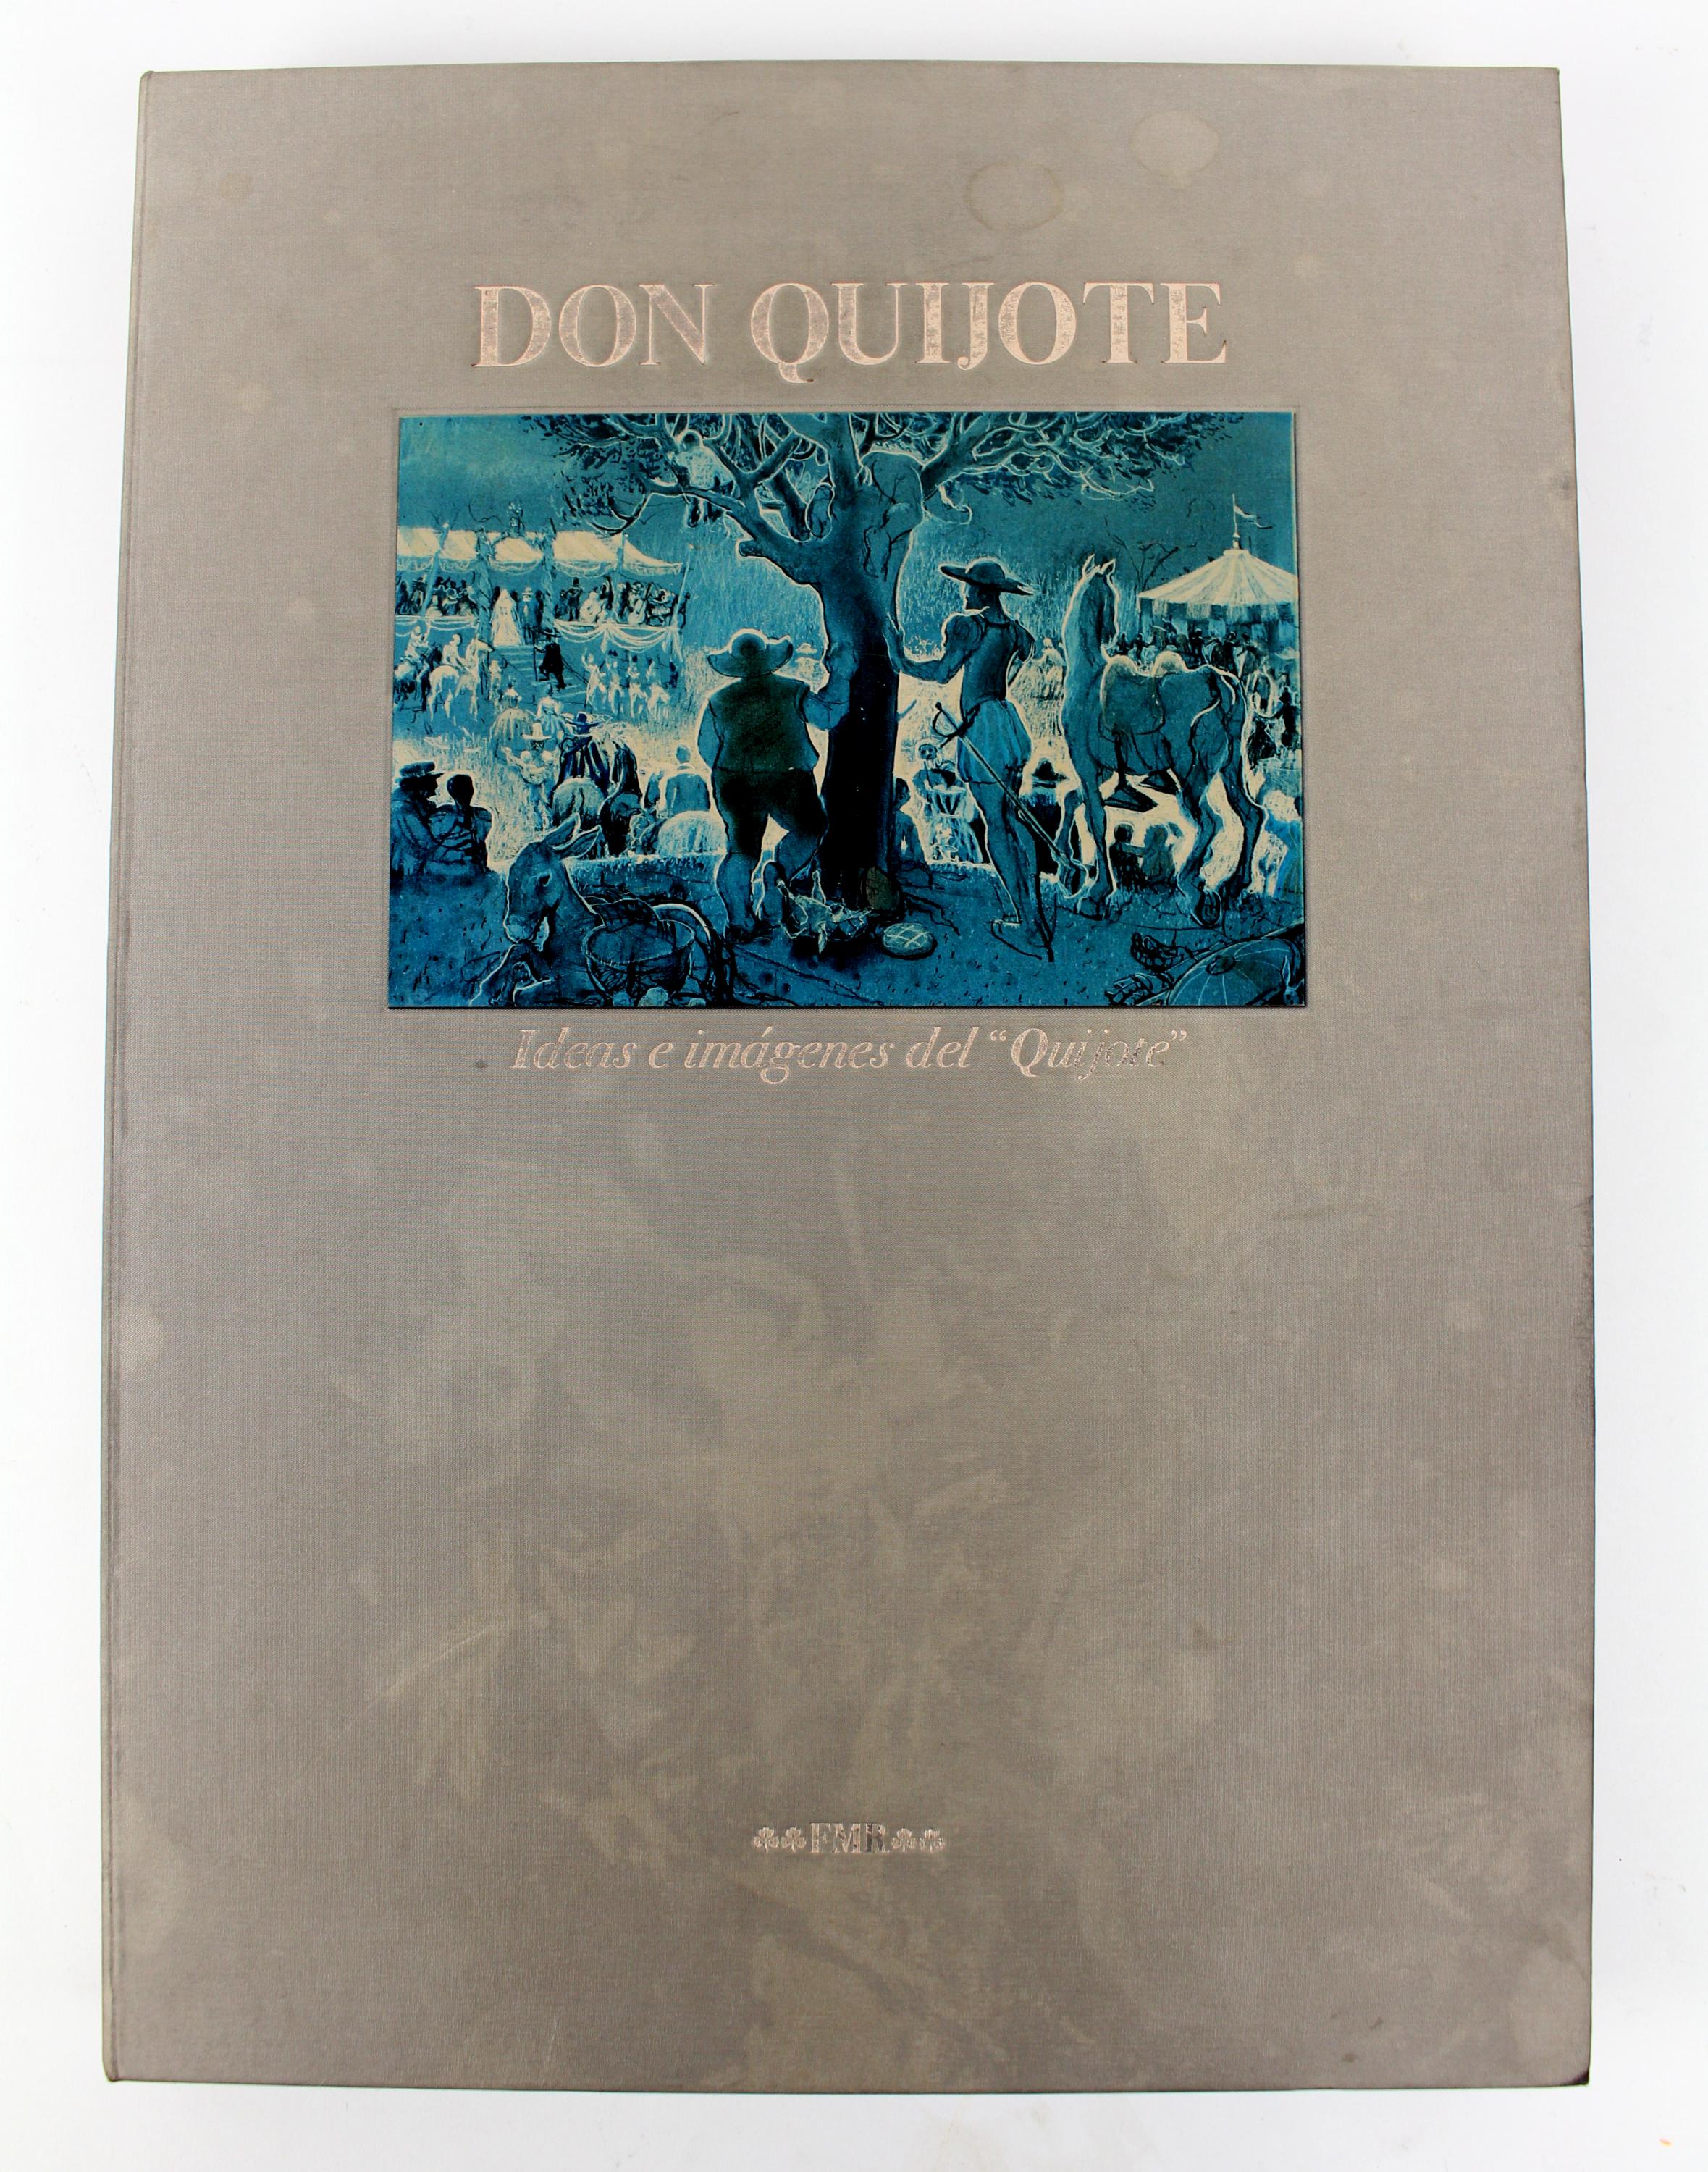 "DON QUIJOTE"